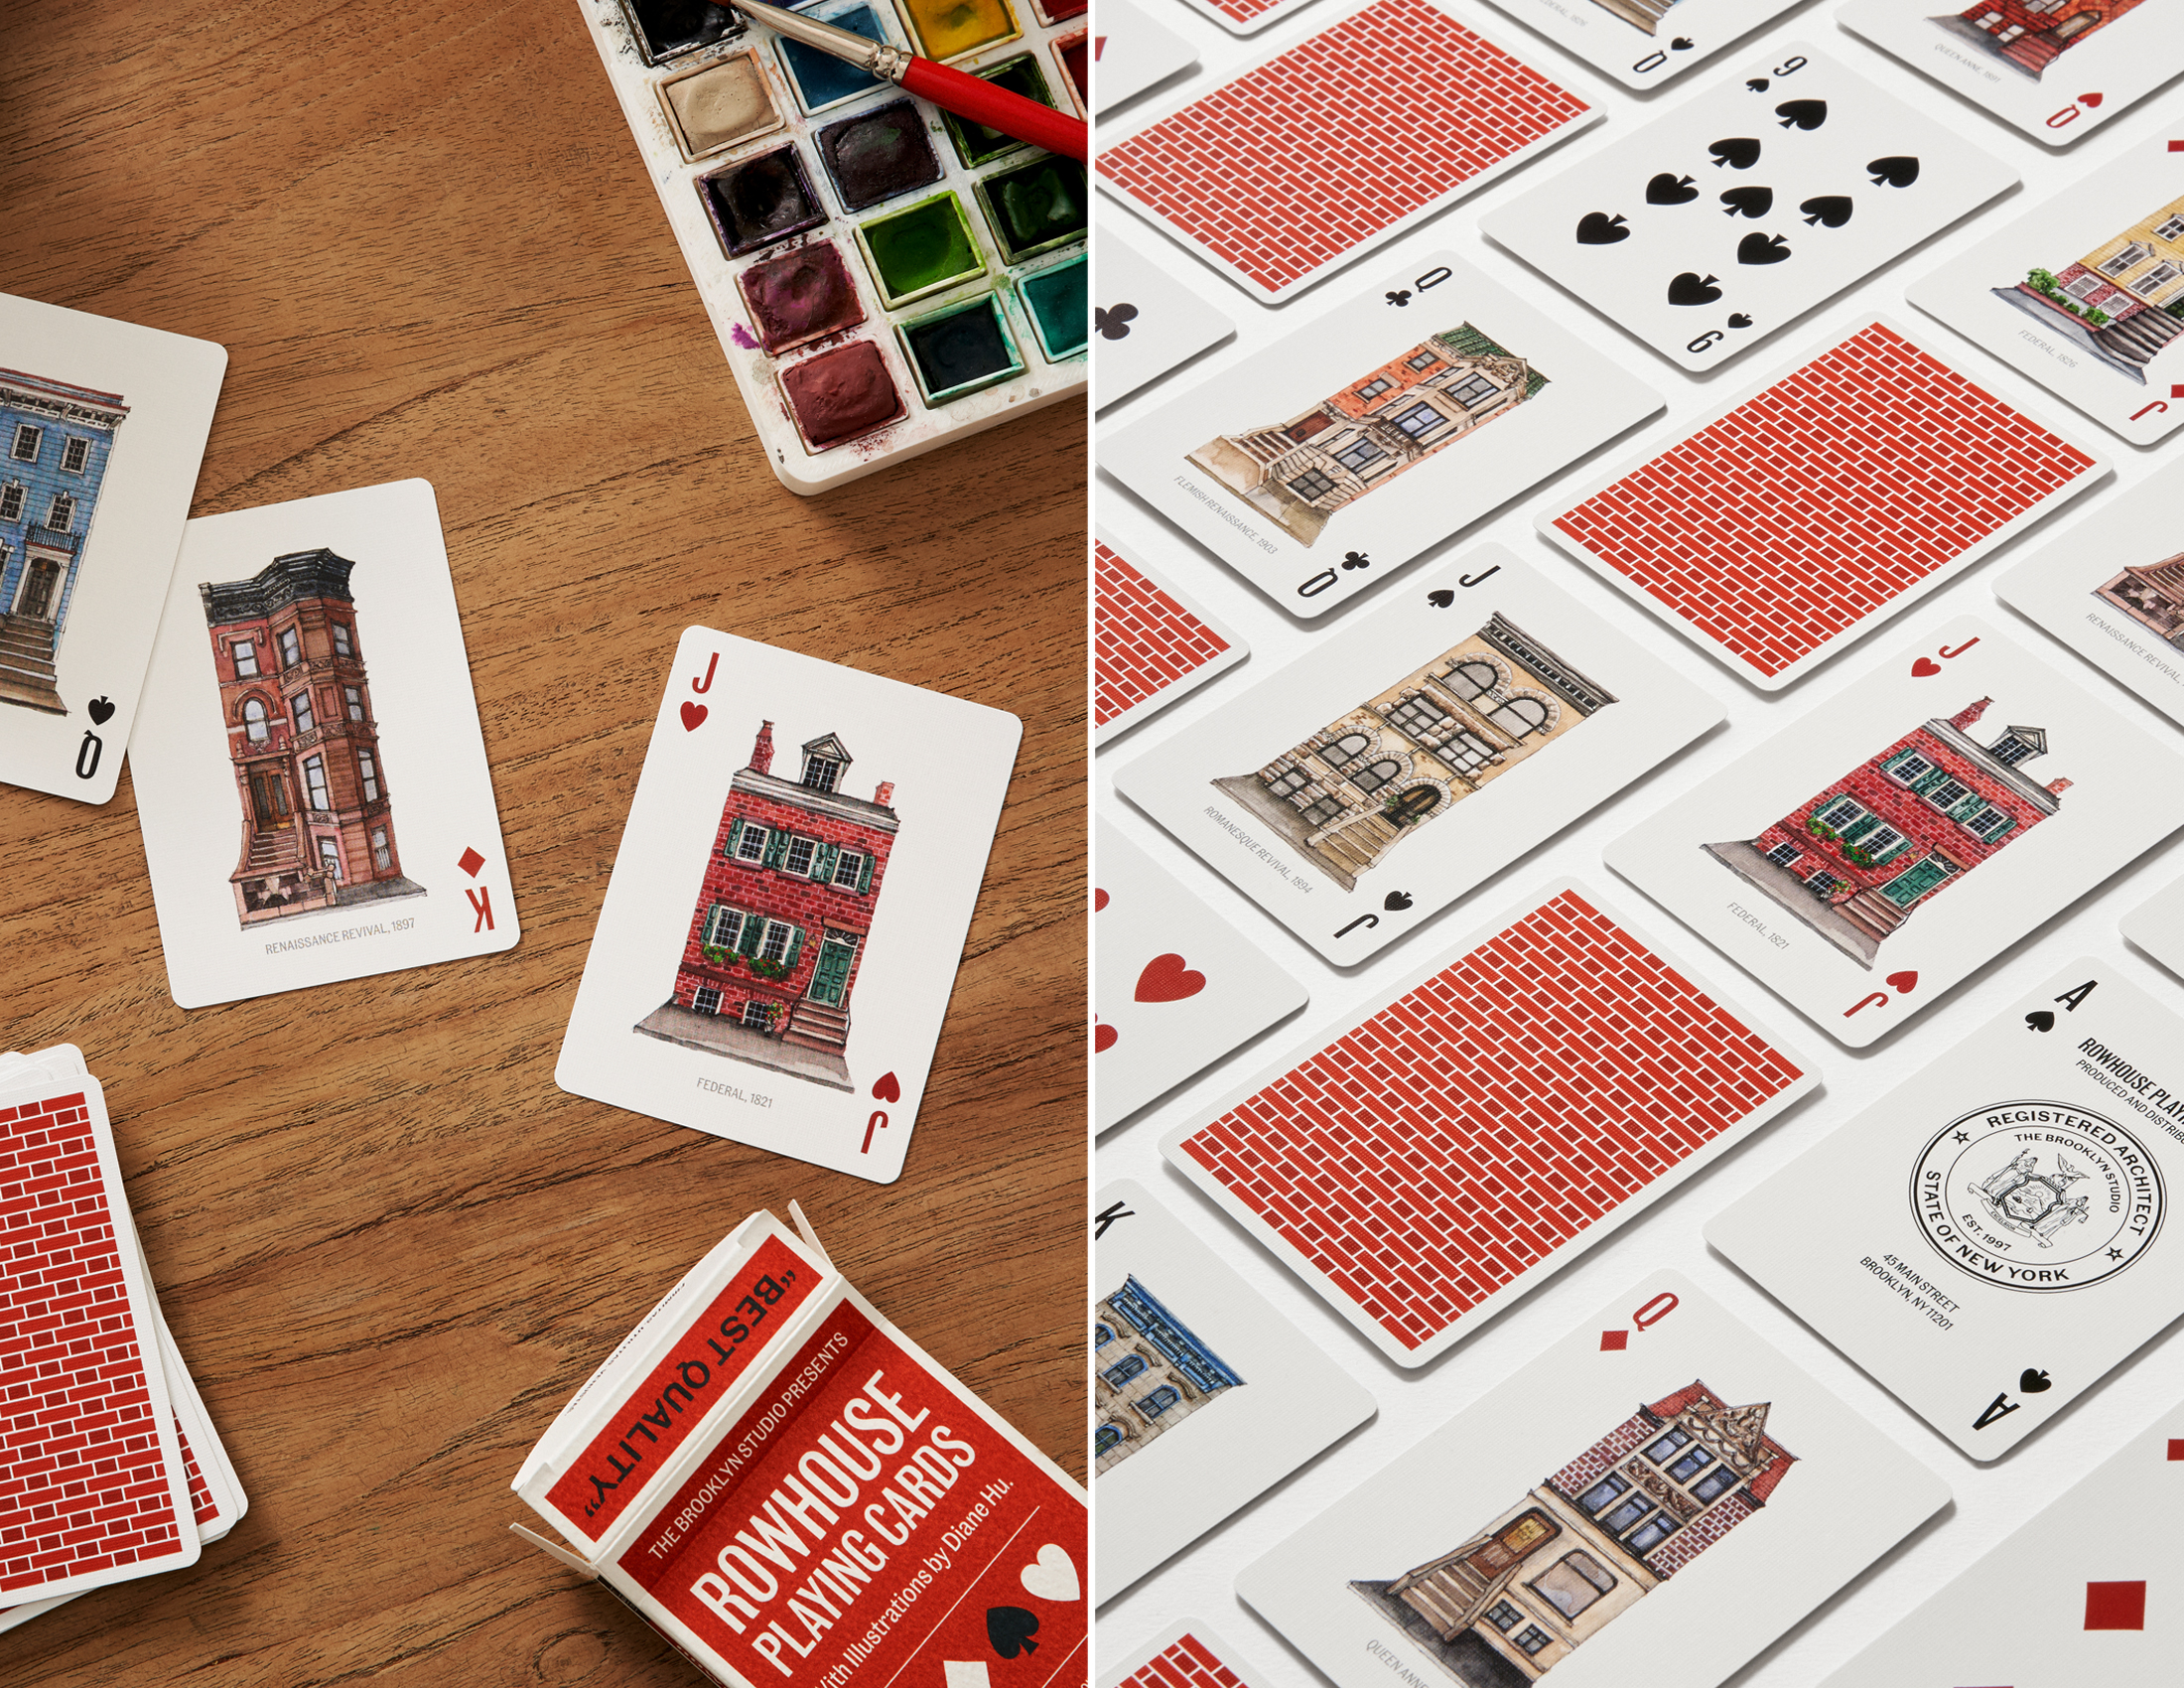 images of the playing cards with rowhouses on one side and brick on the other